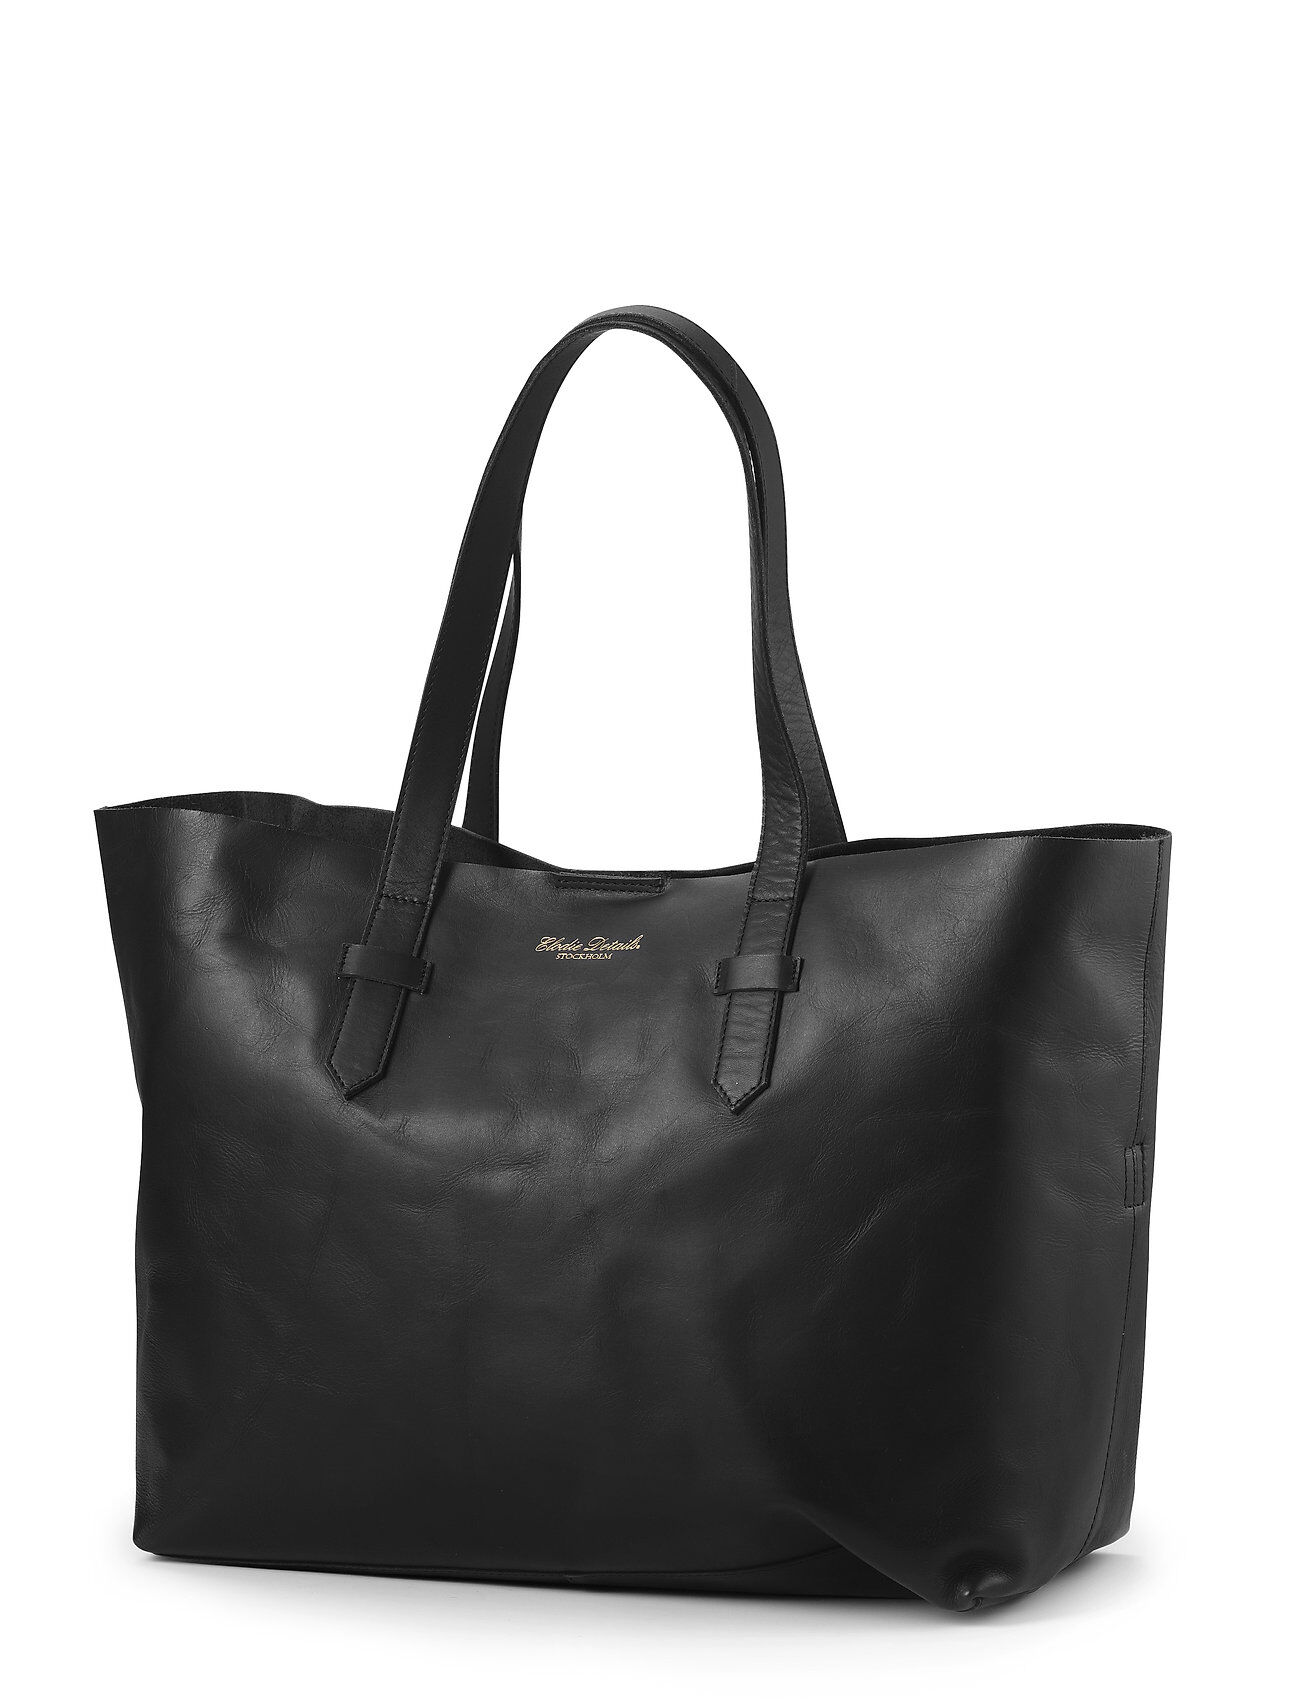 Elodie Details Changing Bag - Black Leather Baby & Maternity Care & Hygiene Changing Bags Svart Elodie Details